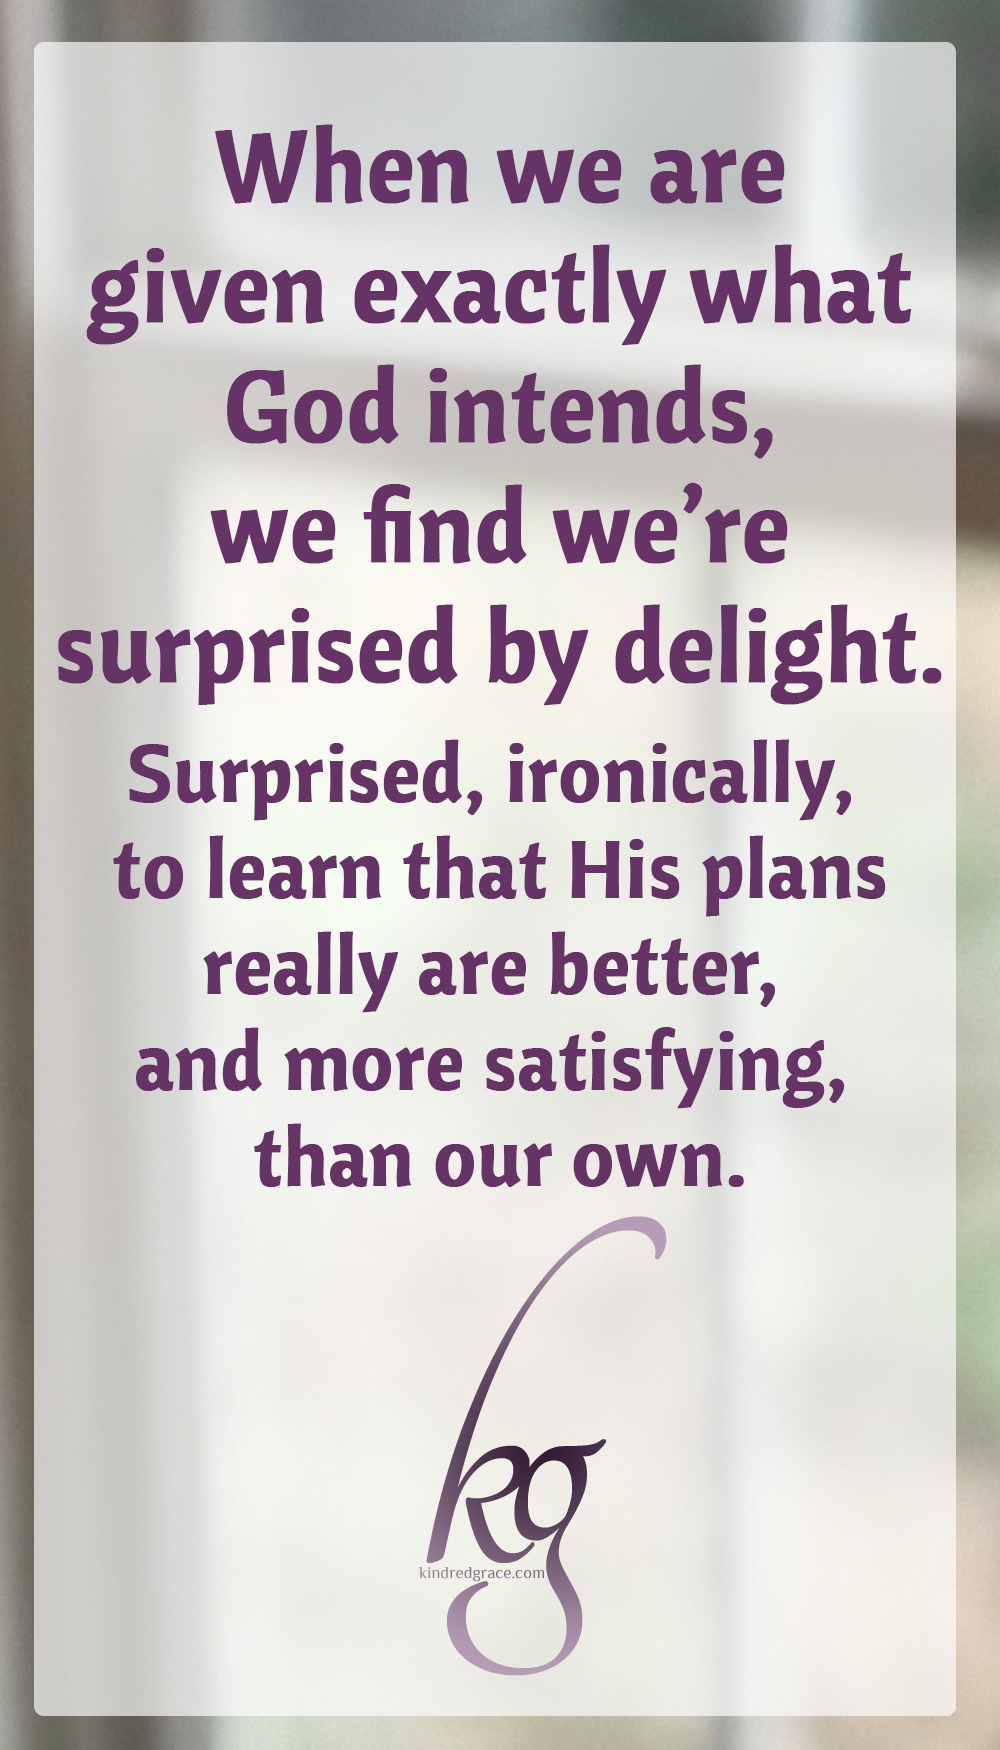 When we are given exactly what God intends, we find we're surprised by delight. Surprised, ironically, to learn that His plans really are better, and more satisfying, than our own.